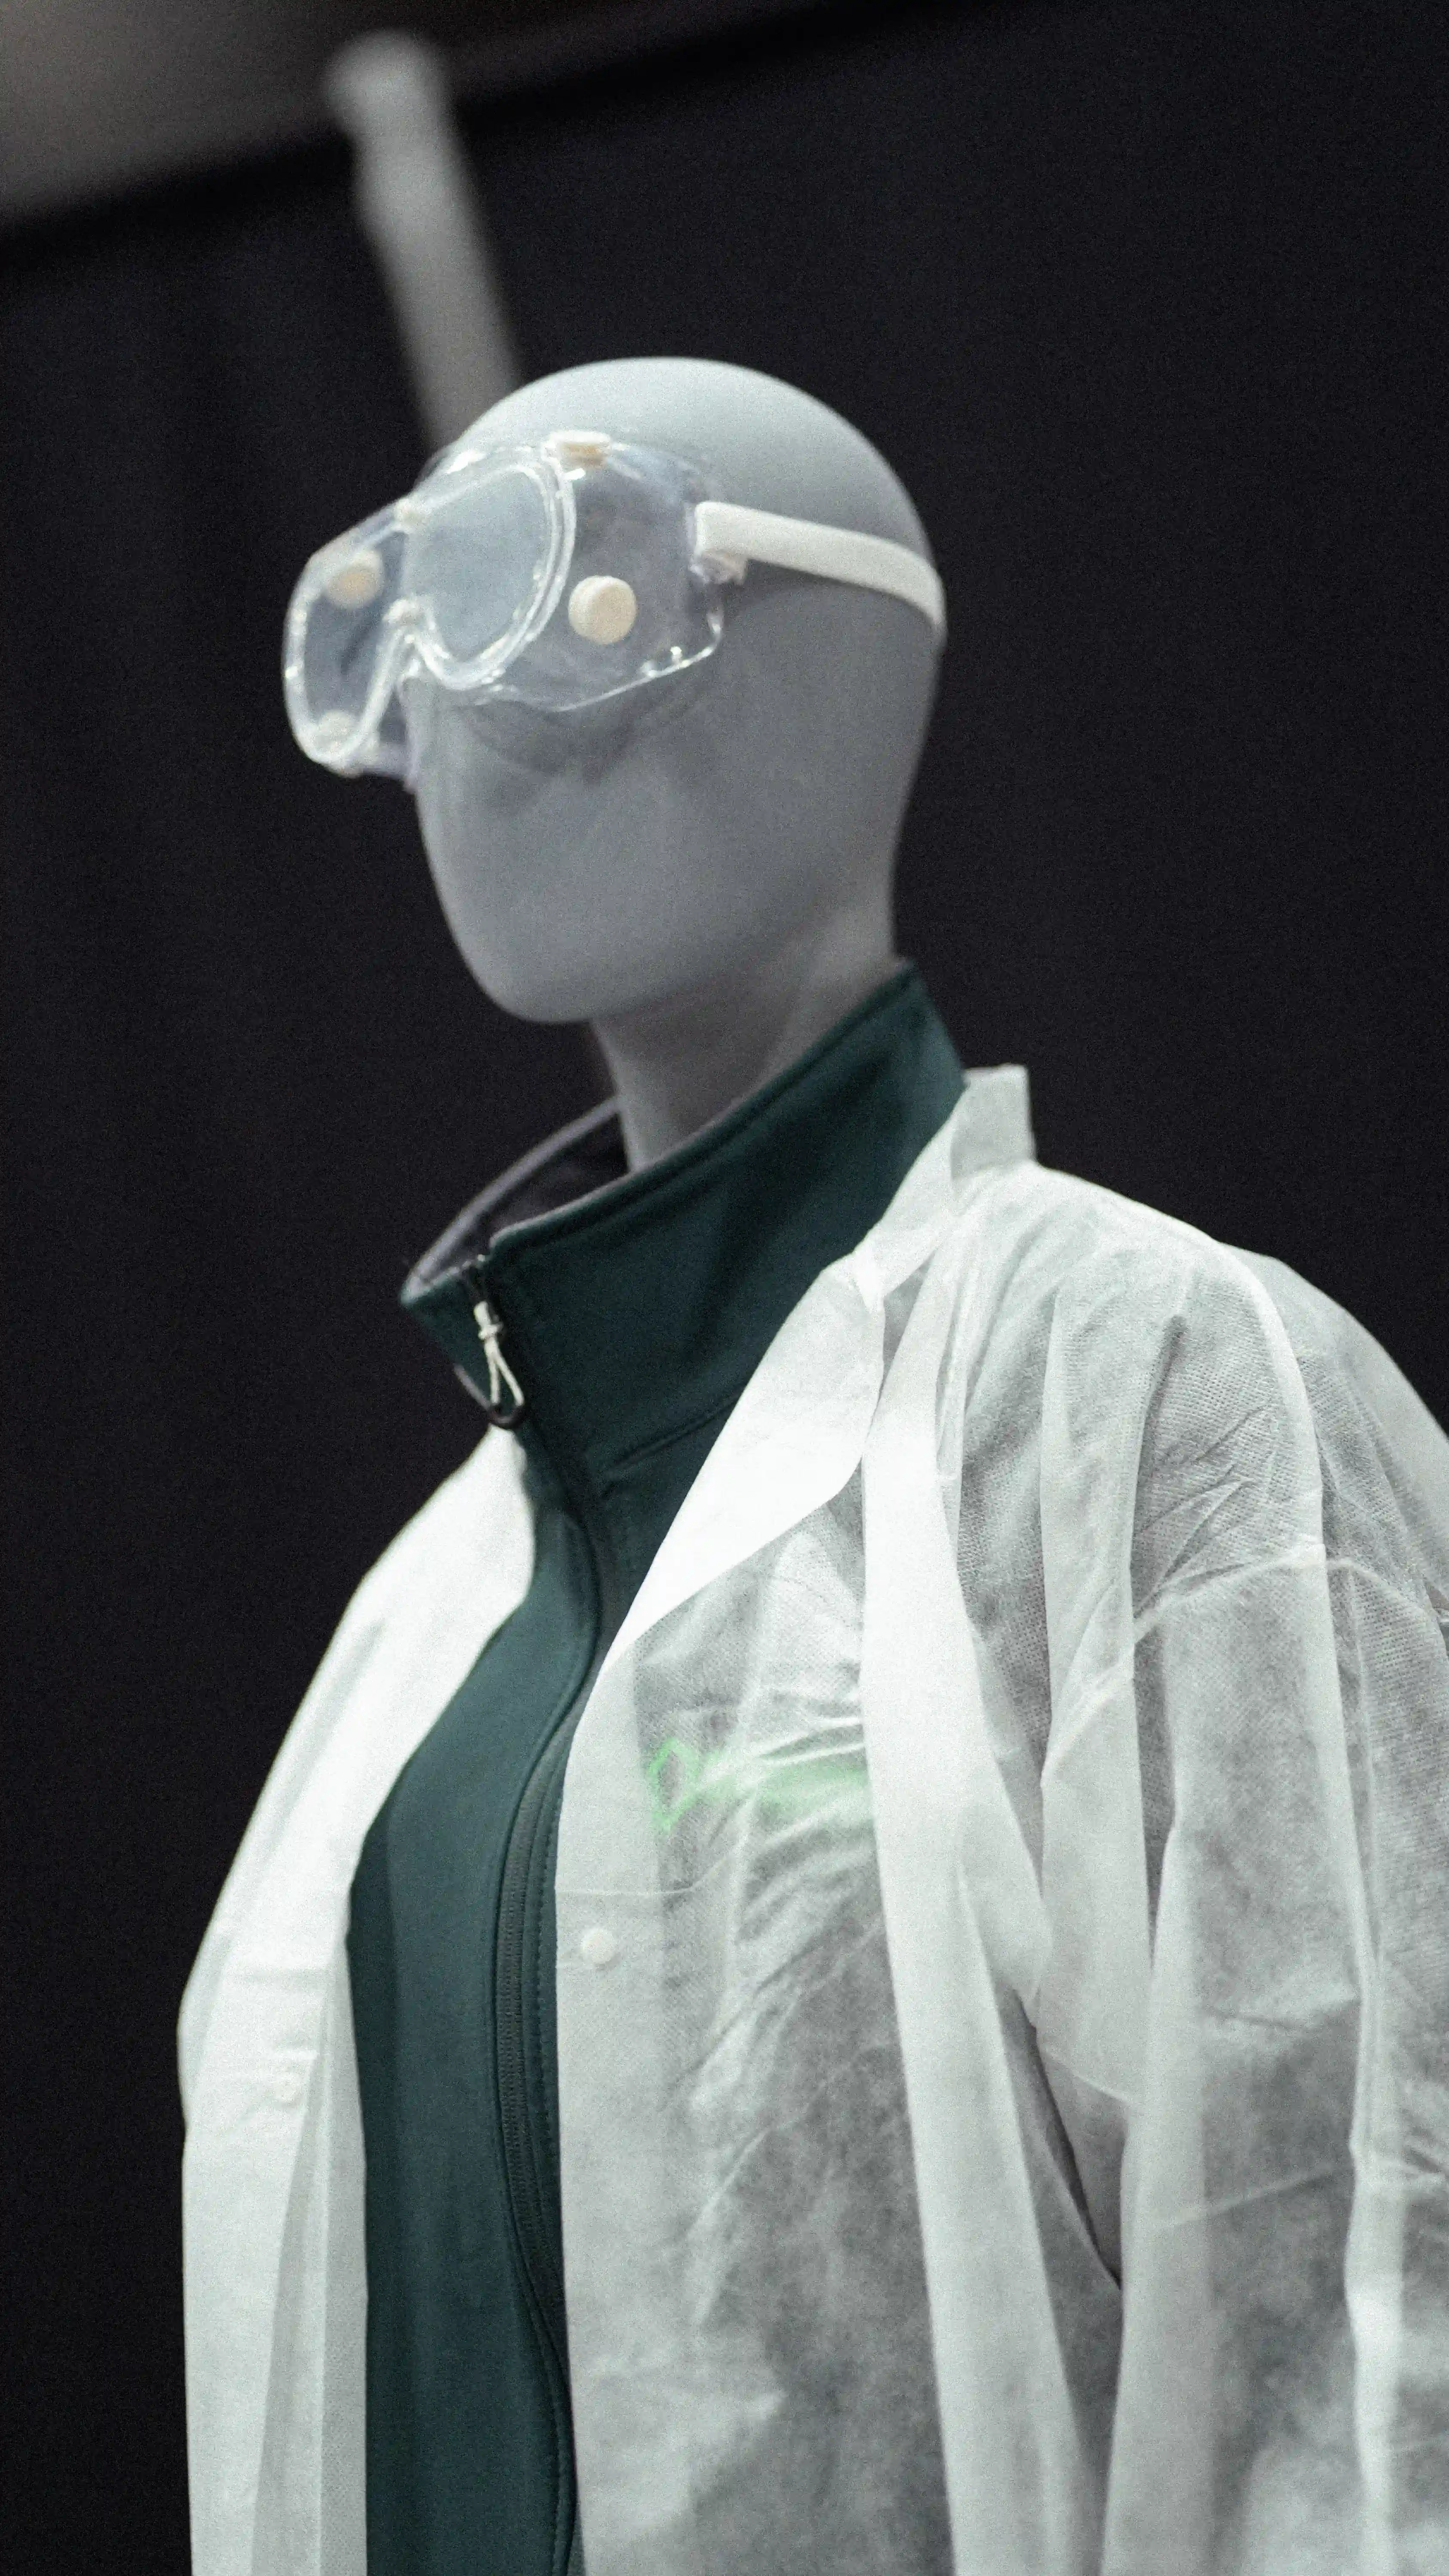 A Model puppet equipped with protective clothing from Pharma Stuff